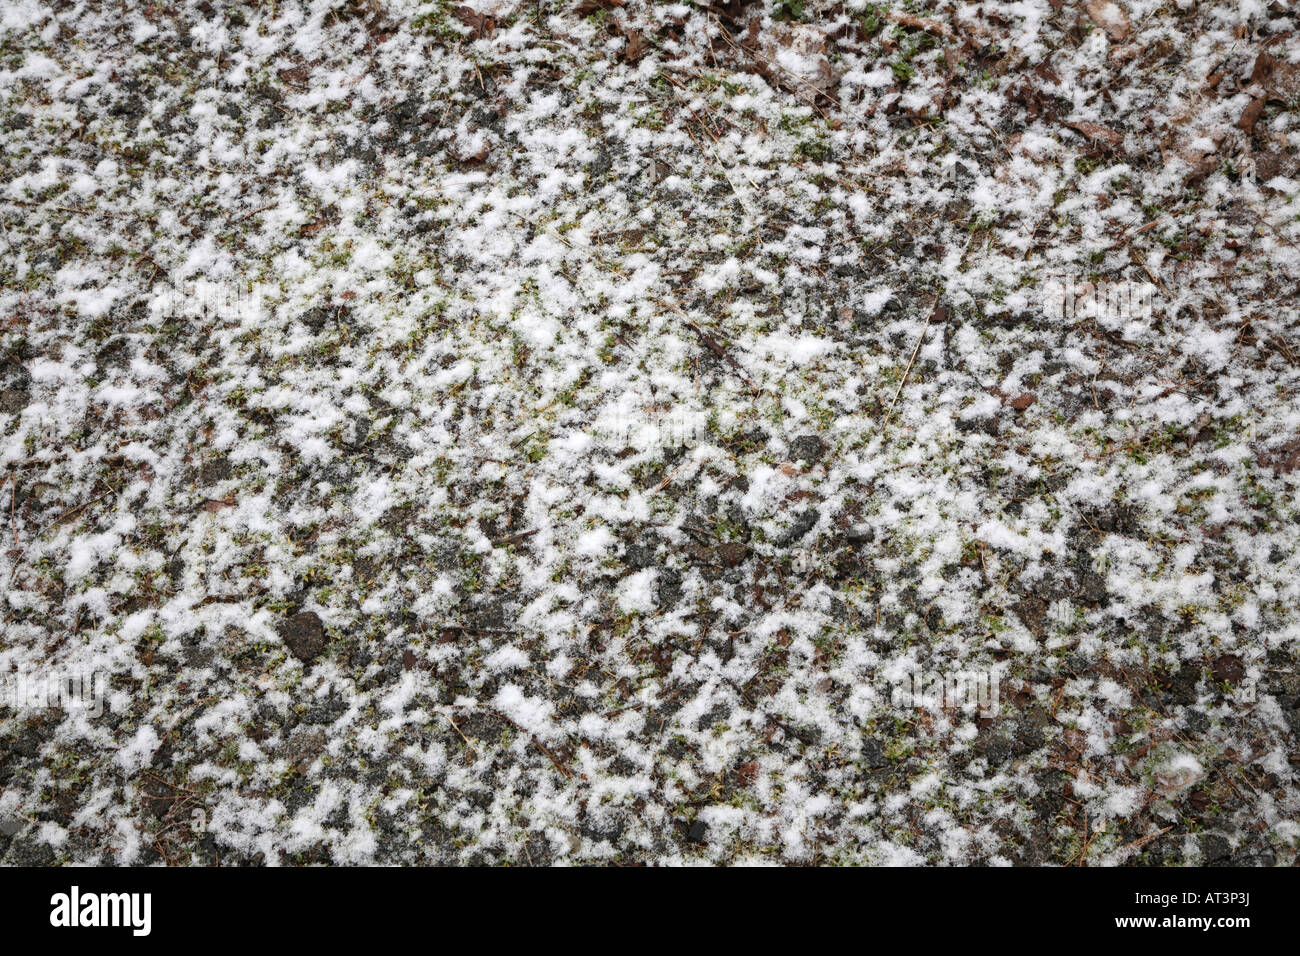 Clumps of large fluffy snowflakes partially covering lawn of green grass Stock Photo